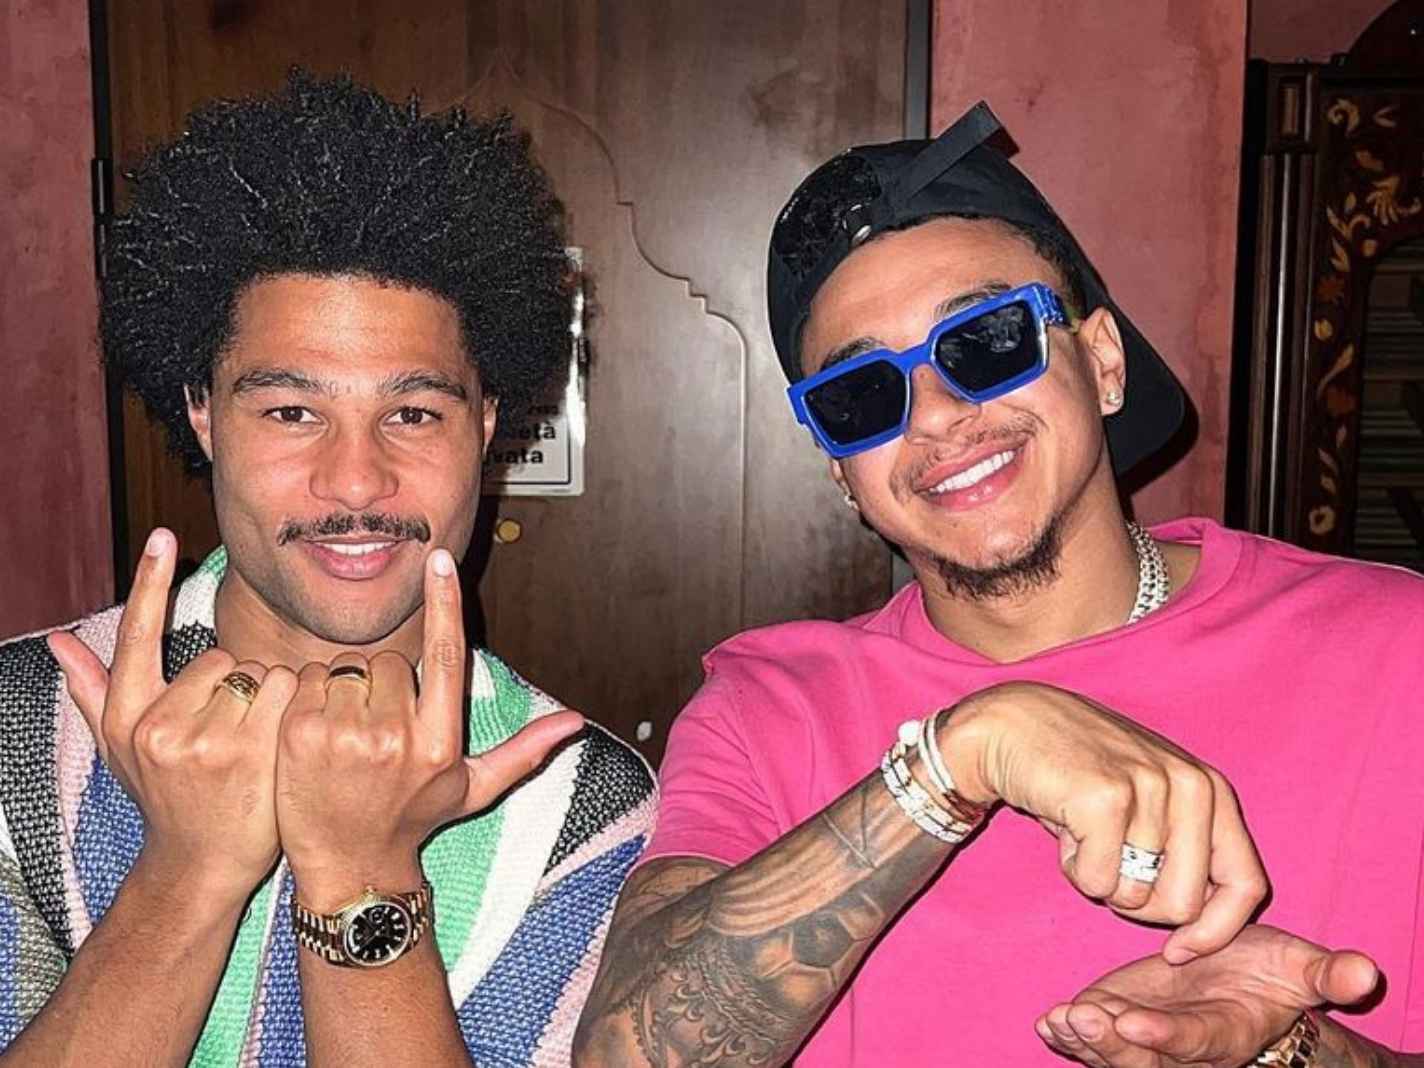 The unexpected link-up between Serge Gnabry and Jesse Lingard in Milan